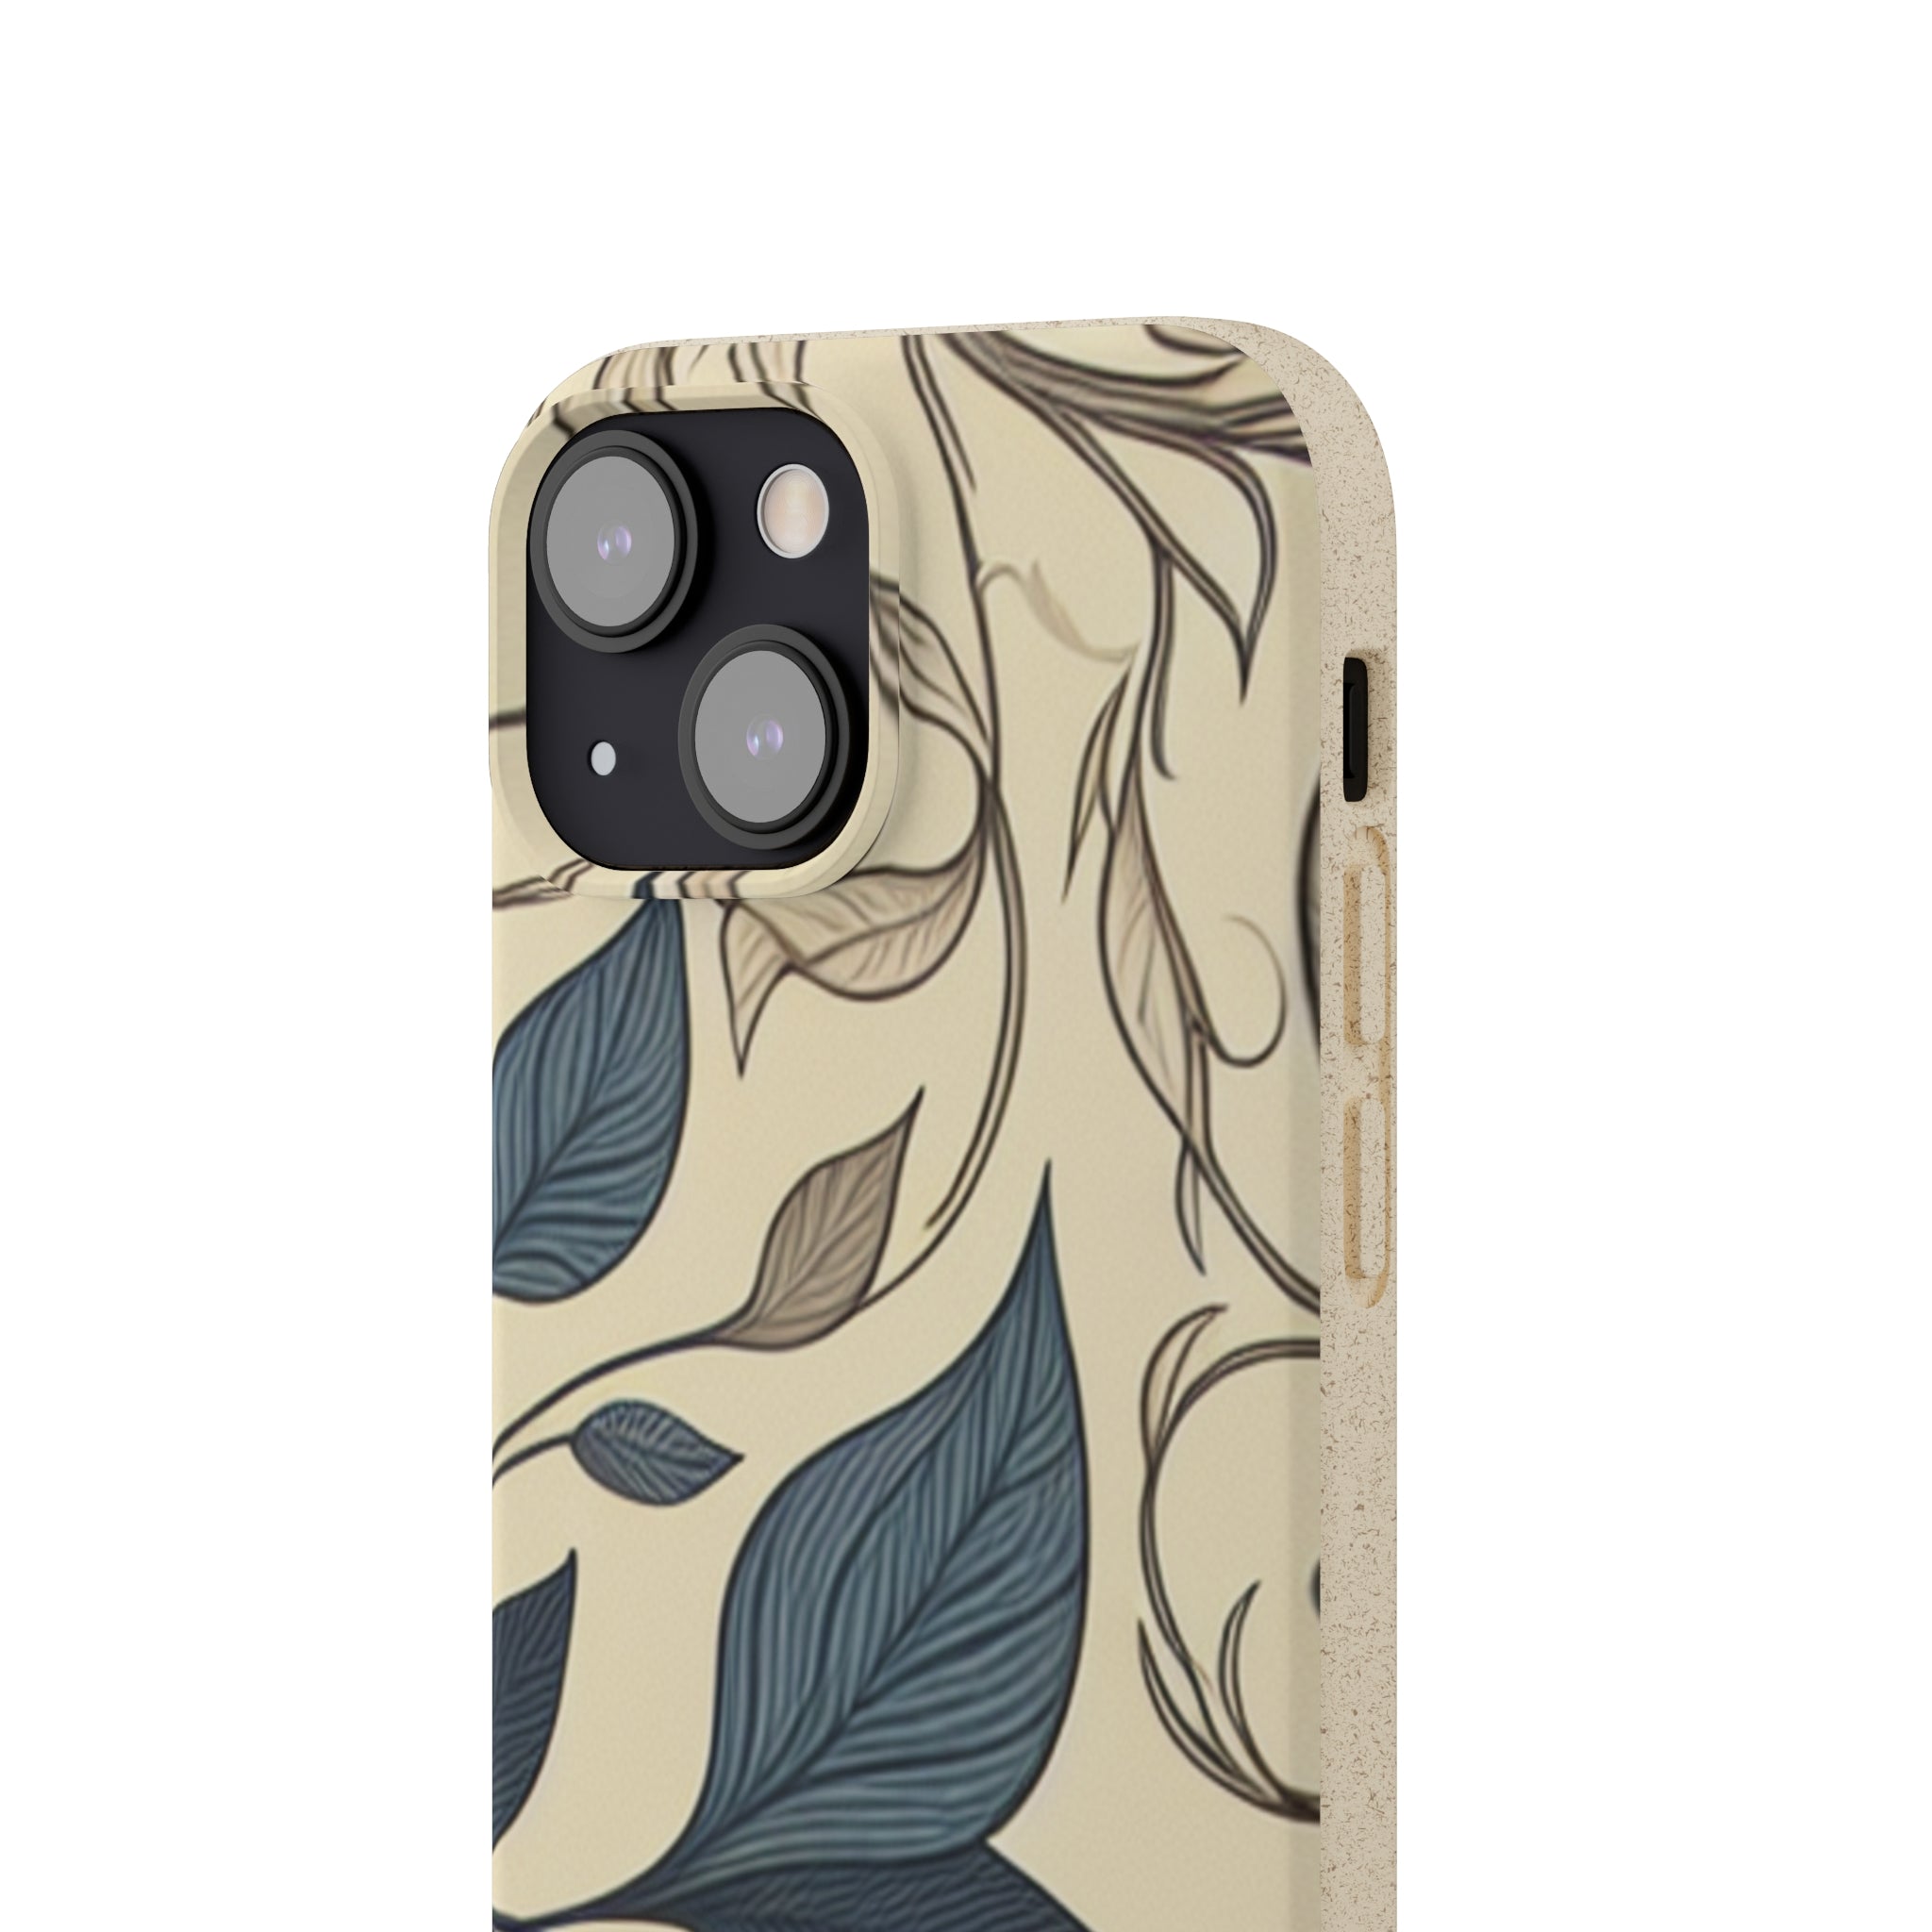 Tom Zhao - Biodegradable iPhone Cases